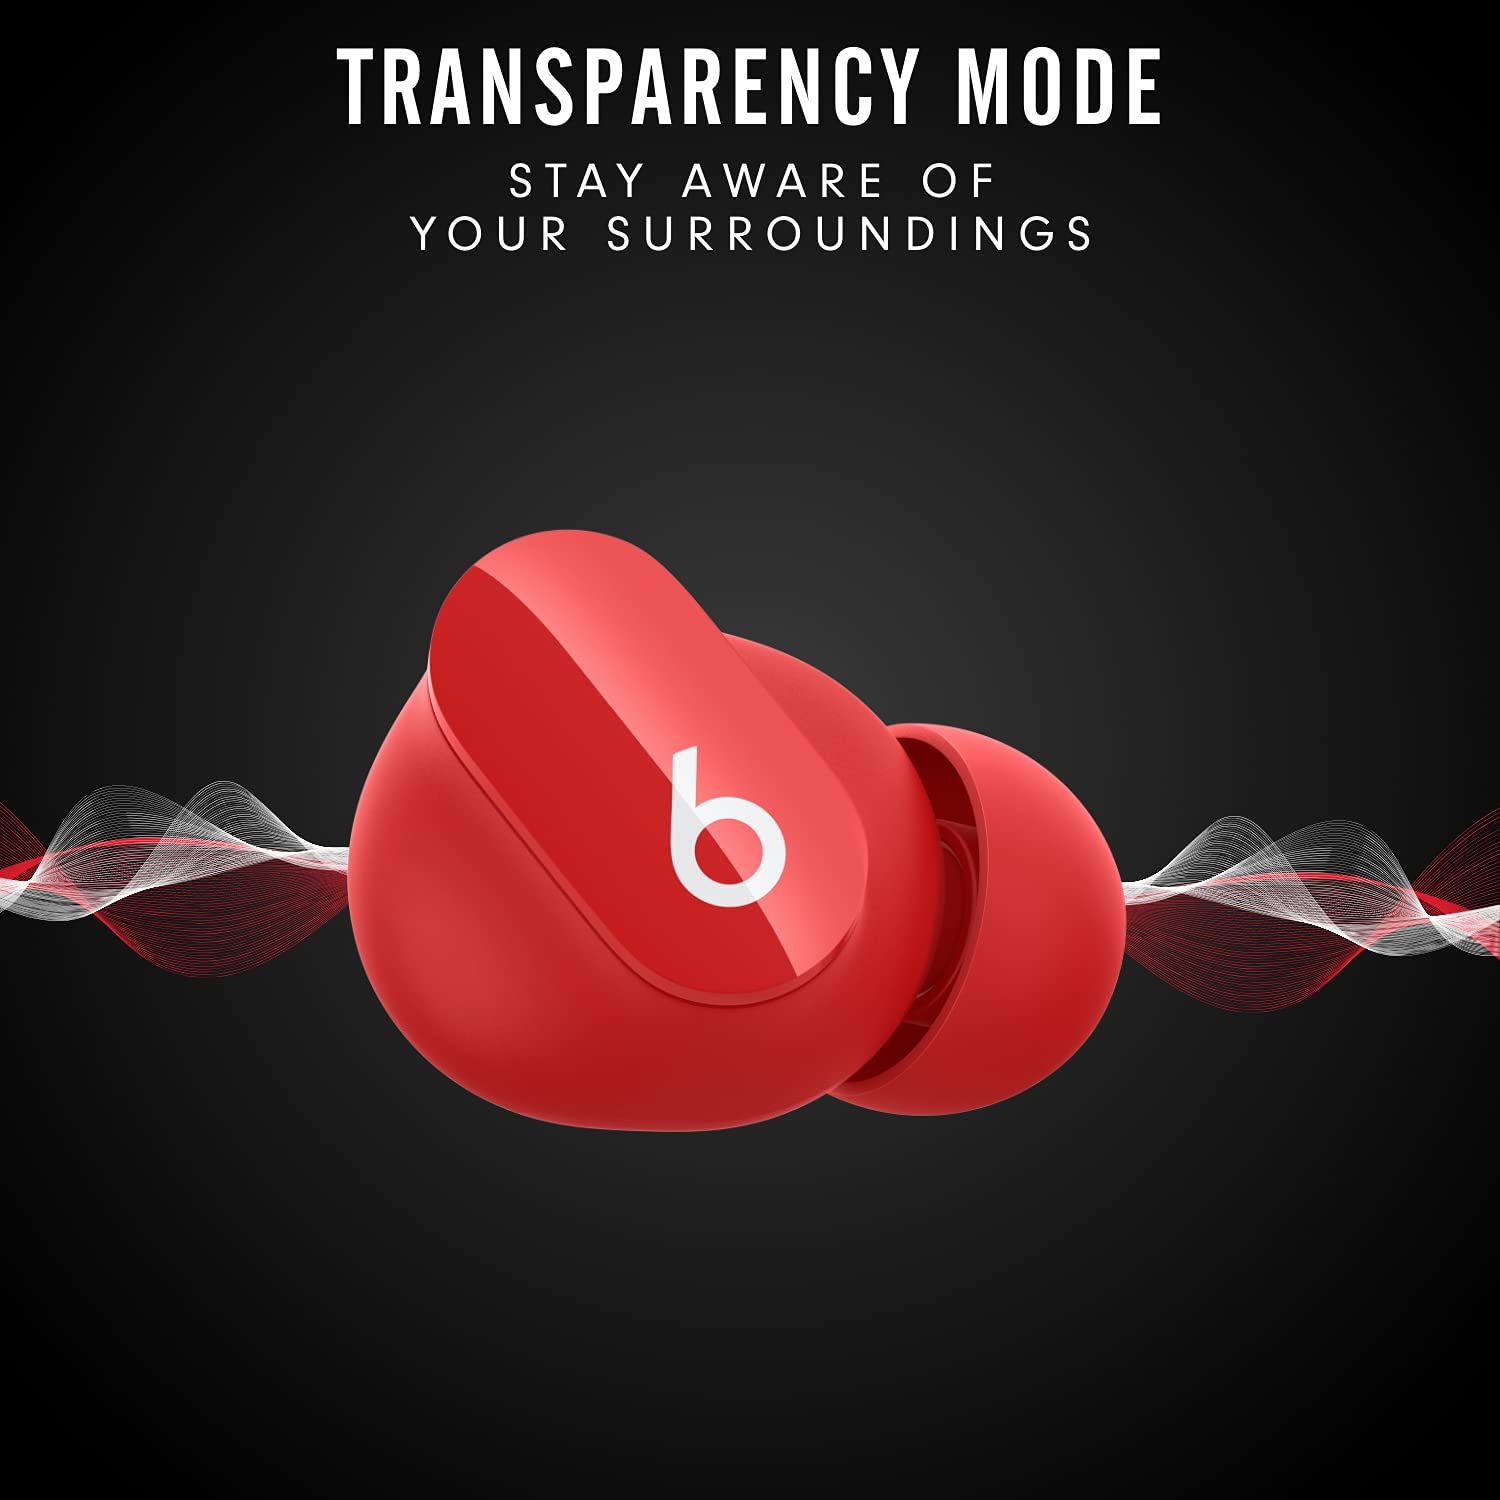 Beats Studio Buds - True Wireless Noise Cancelling Earbuds - Compatible with Apple & Android, Built-in Microphone, IPX4 Rating, Sweat Resistant Earphones, Class 1 Bluetooth Headphones Red